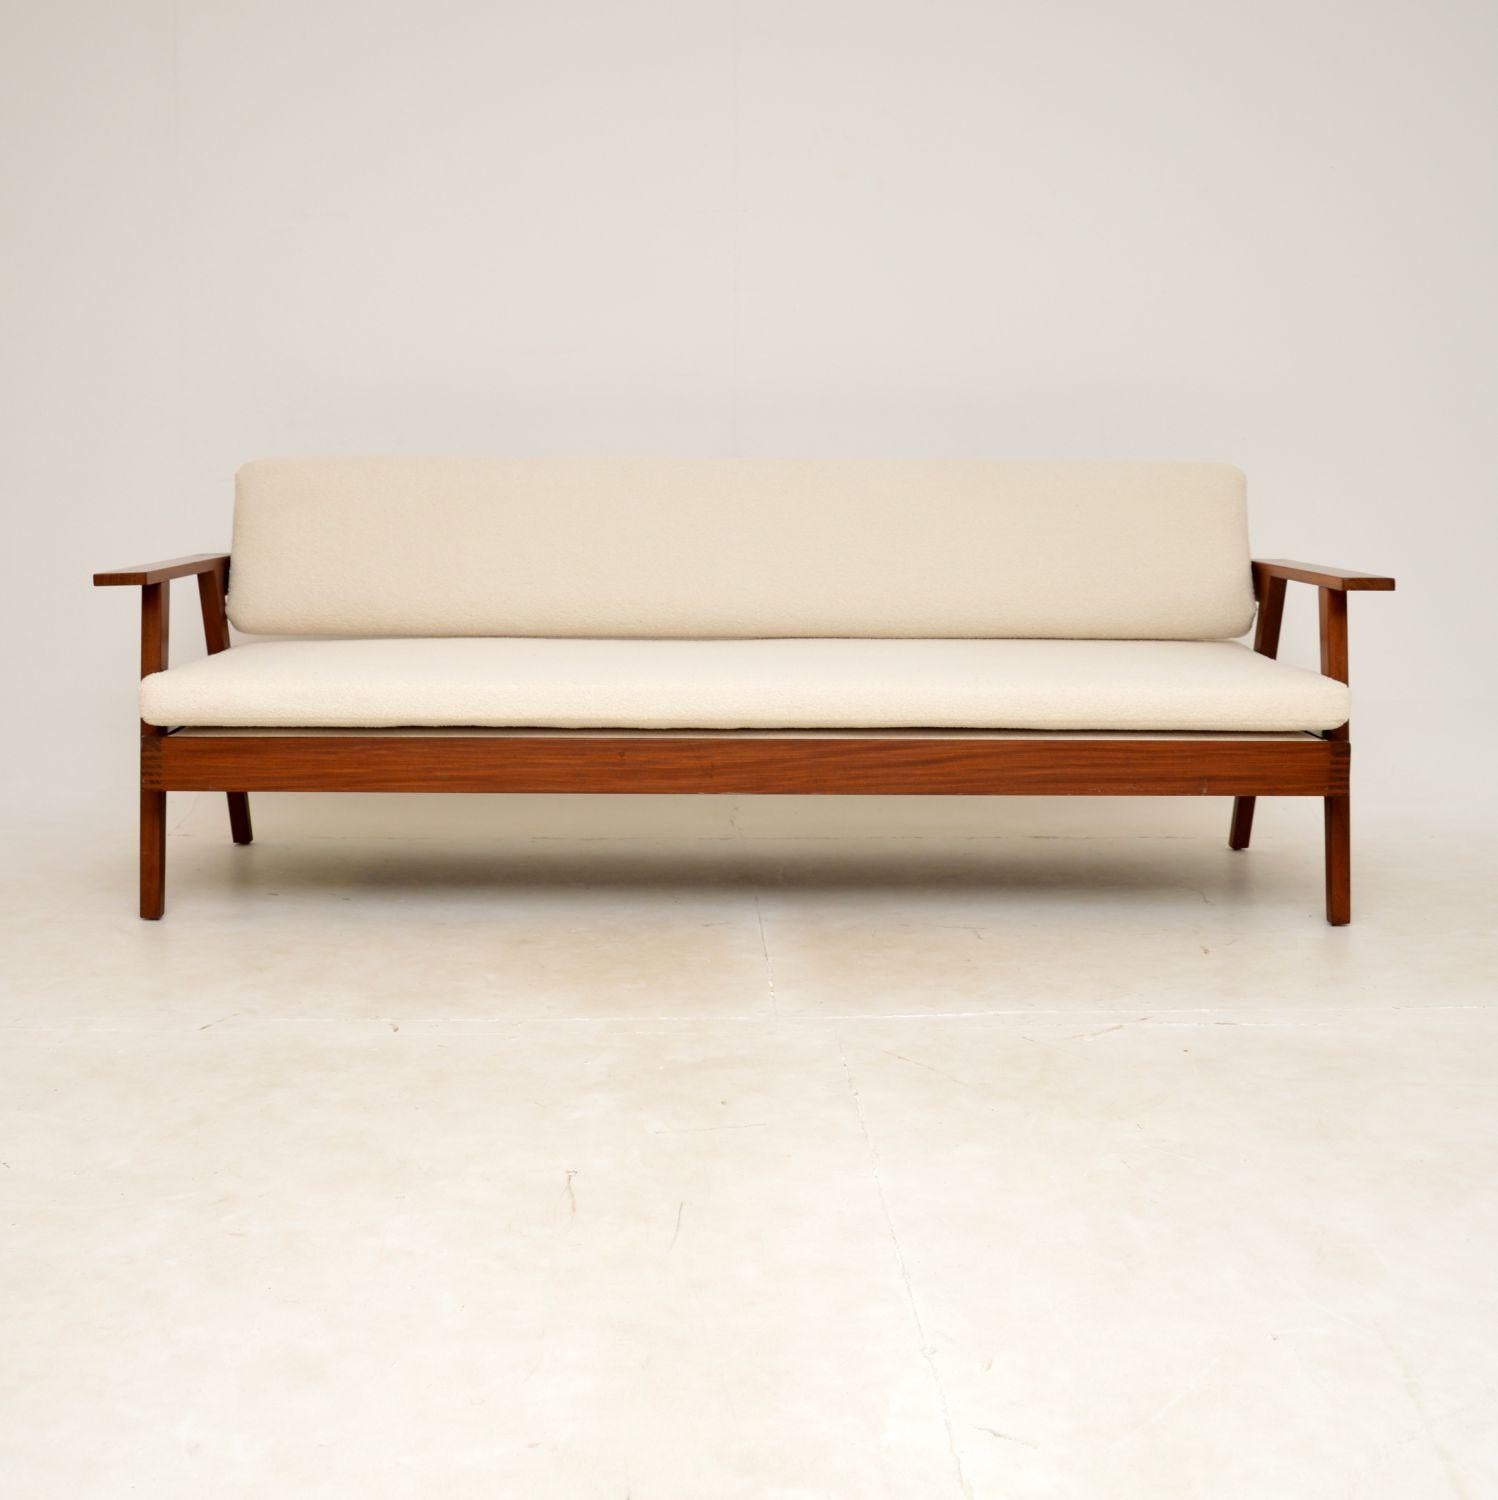 A stylish and extremely well made vintage sofa bed. This was made in England, it dates from around the 1960s.

The quality is outstanding, this has beautiful lines and looks amazing from all angles. The frame has a gorgeous colour tone and lovely